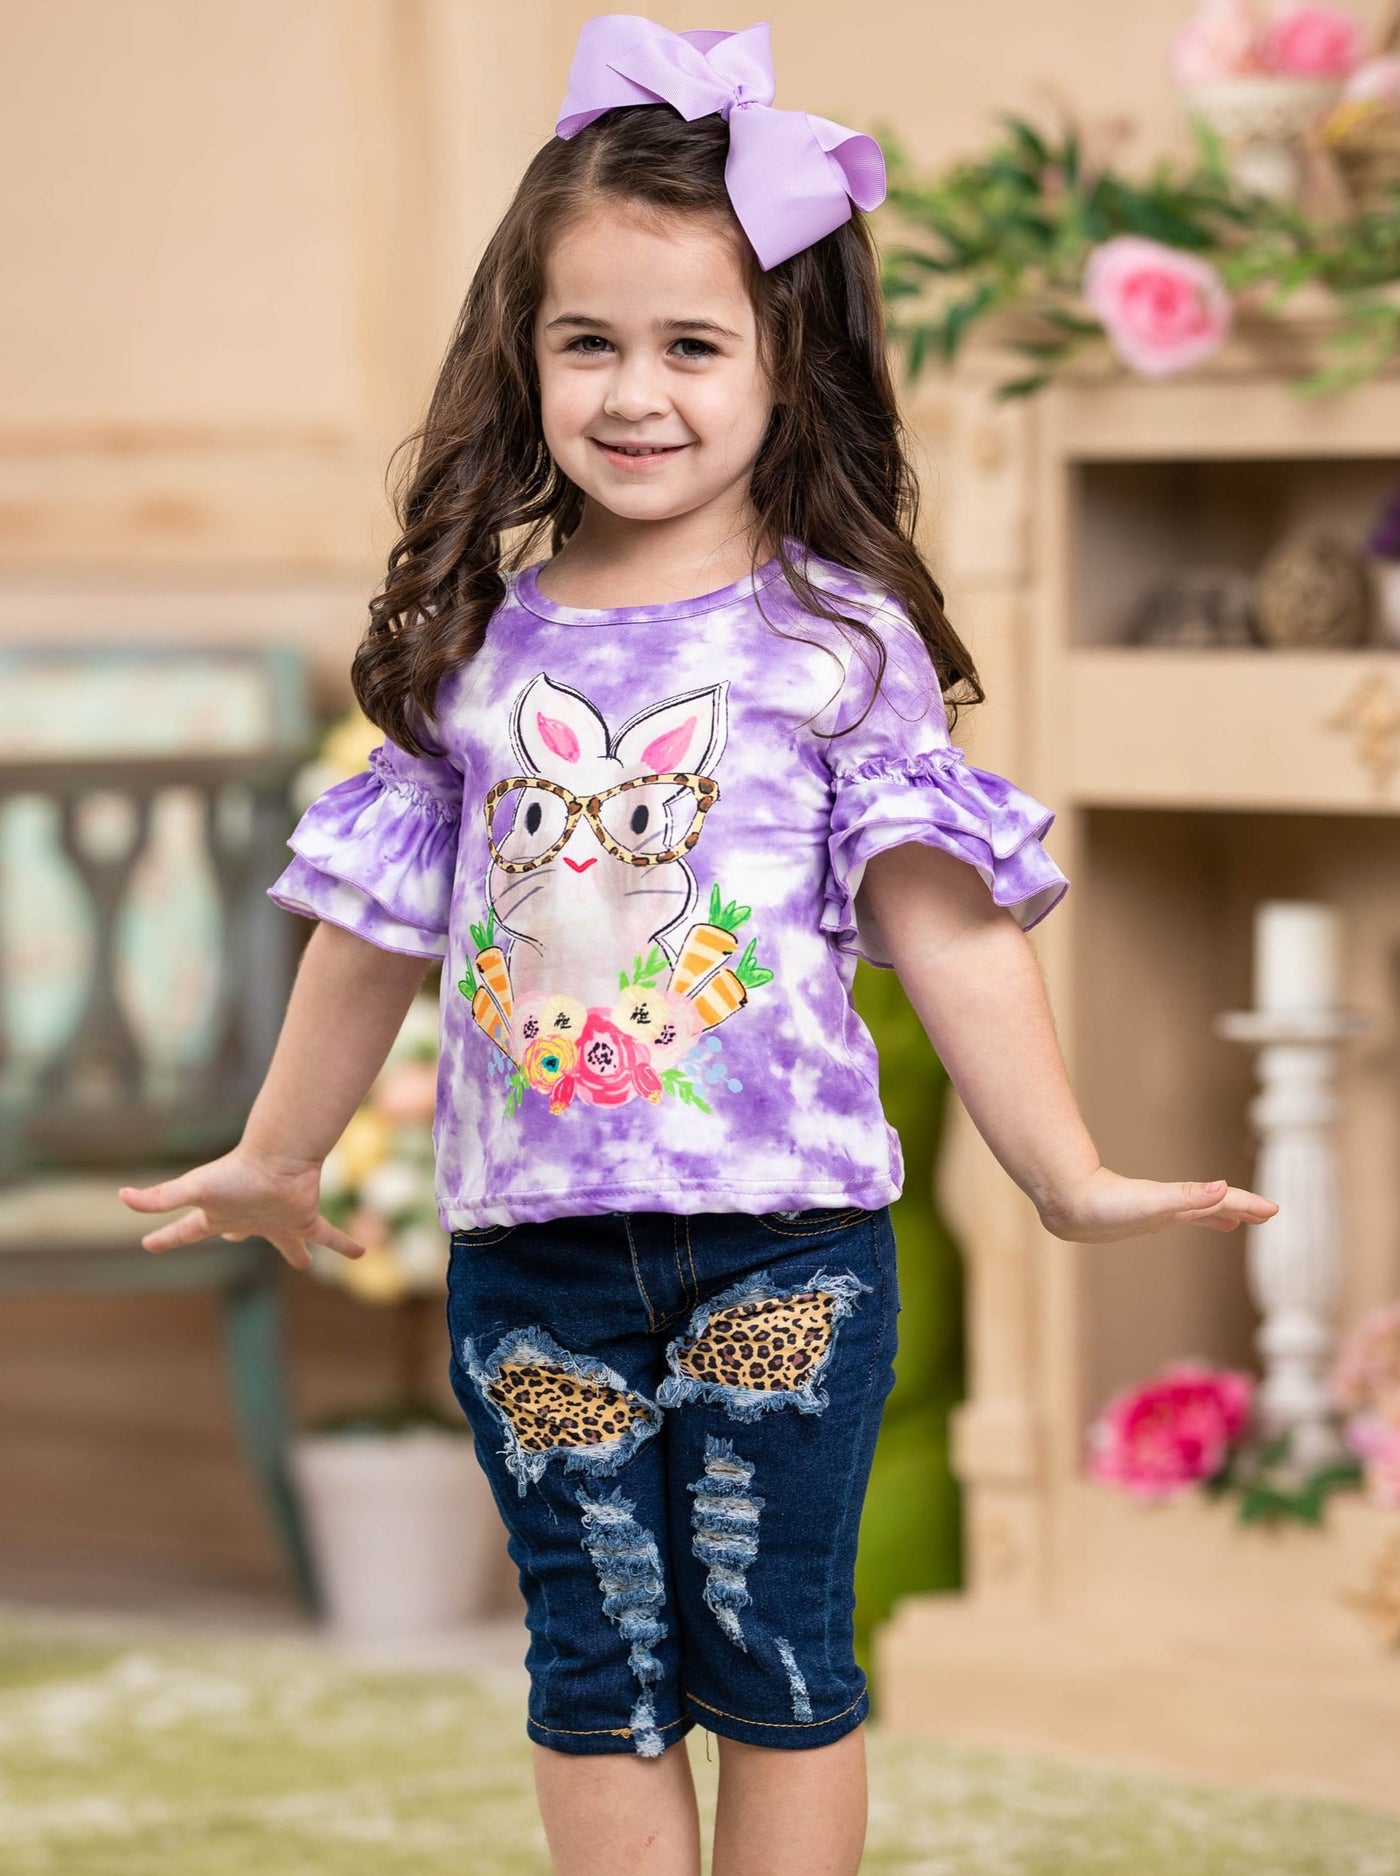 Girls Easter-themed set features a purple tie-dye top with bunny graphic and leopard print patched jeans with sash for 2T to 10Y toddlers and girls